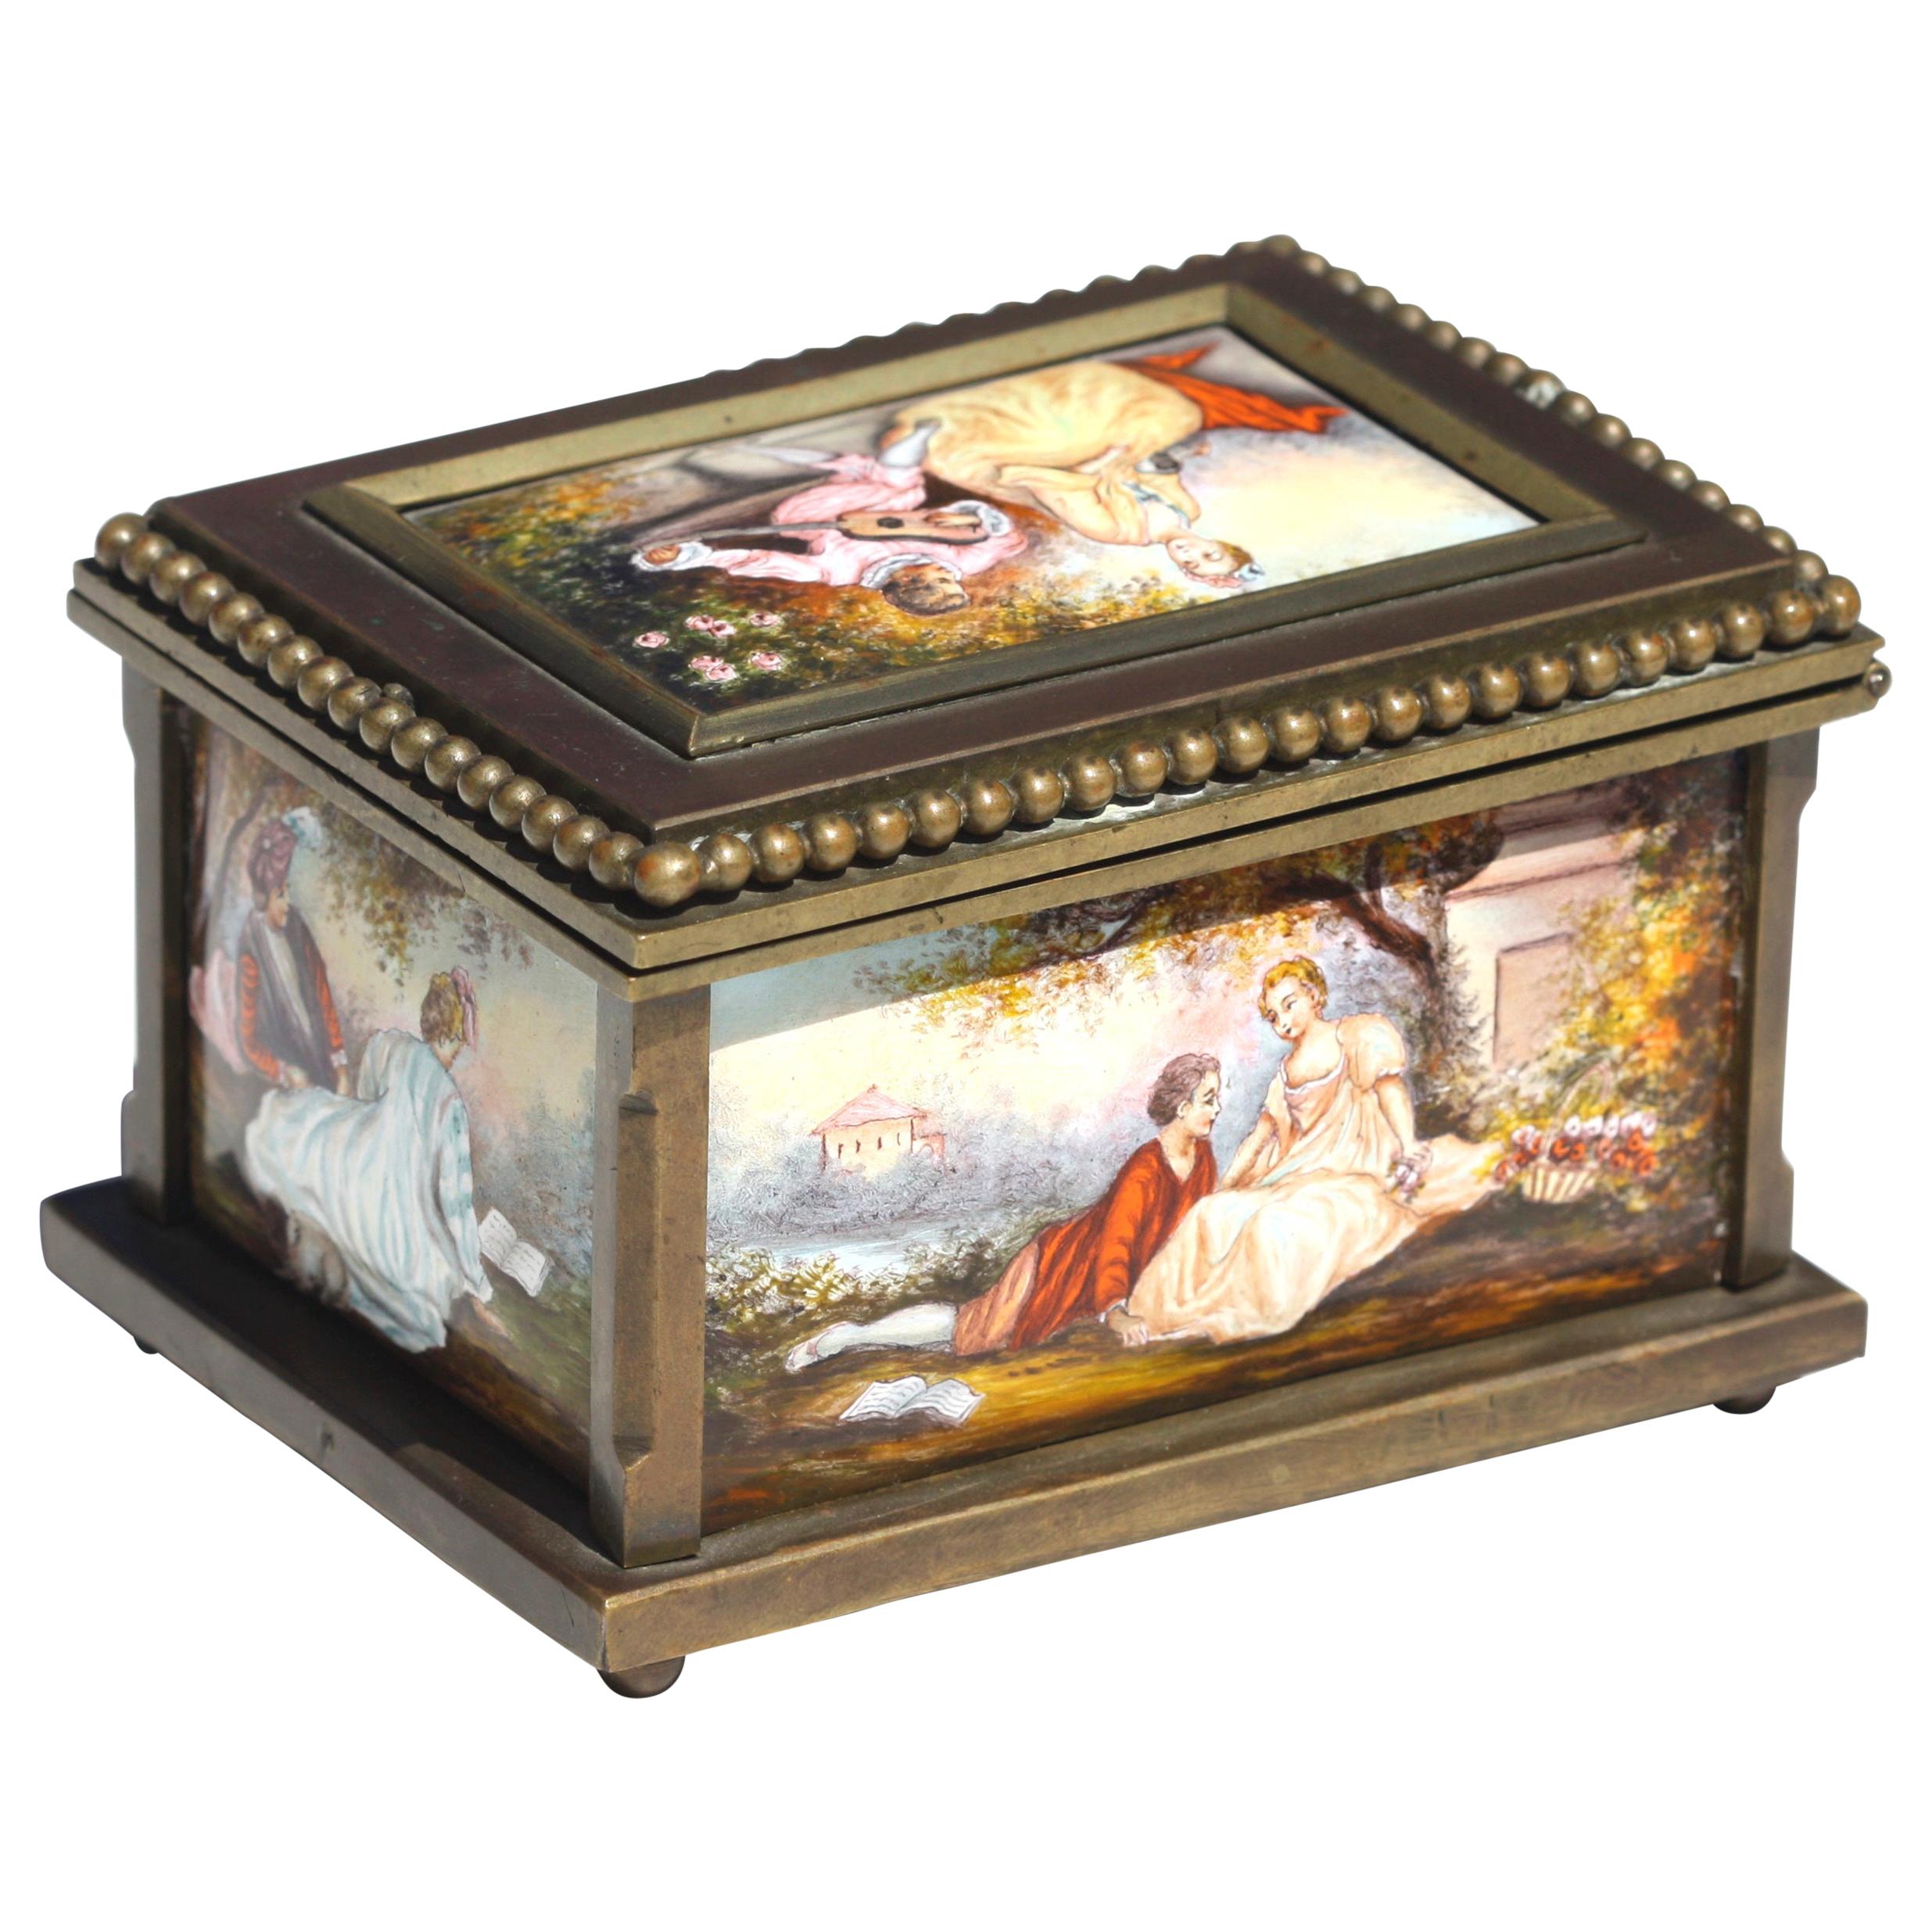 Viennese Enamel & Bronze Box, Decorated with Five Romantic Panels